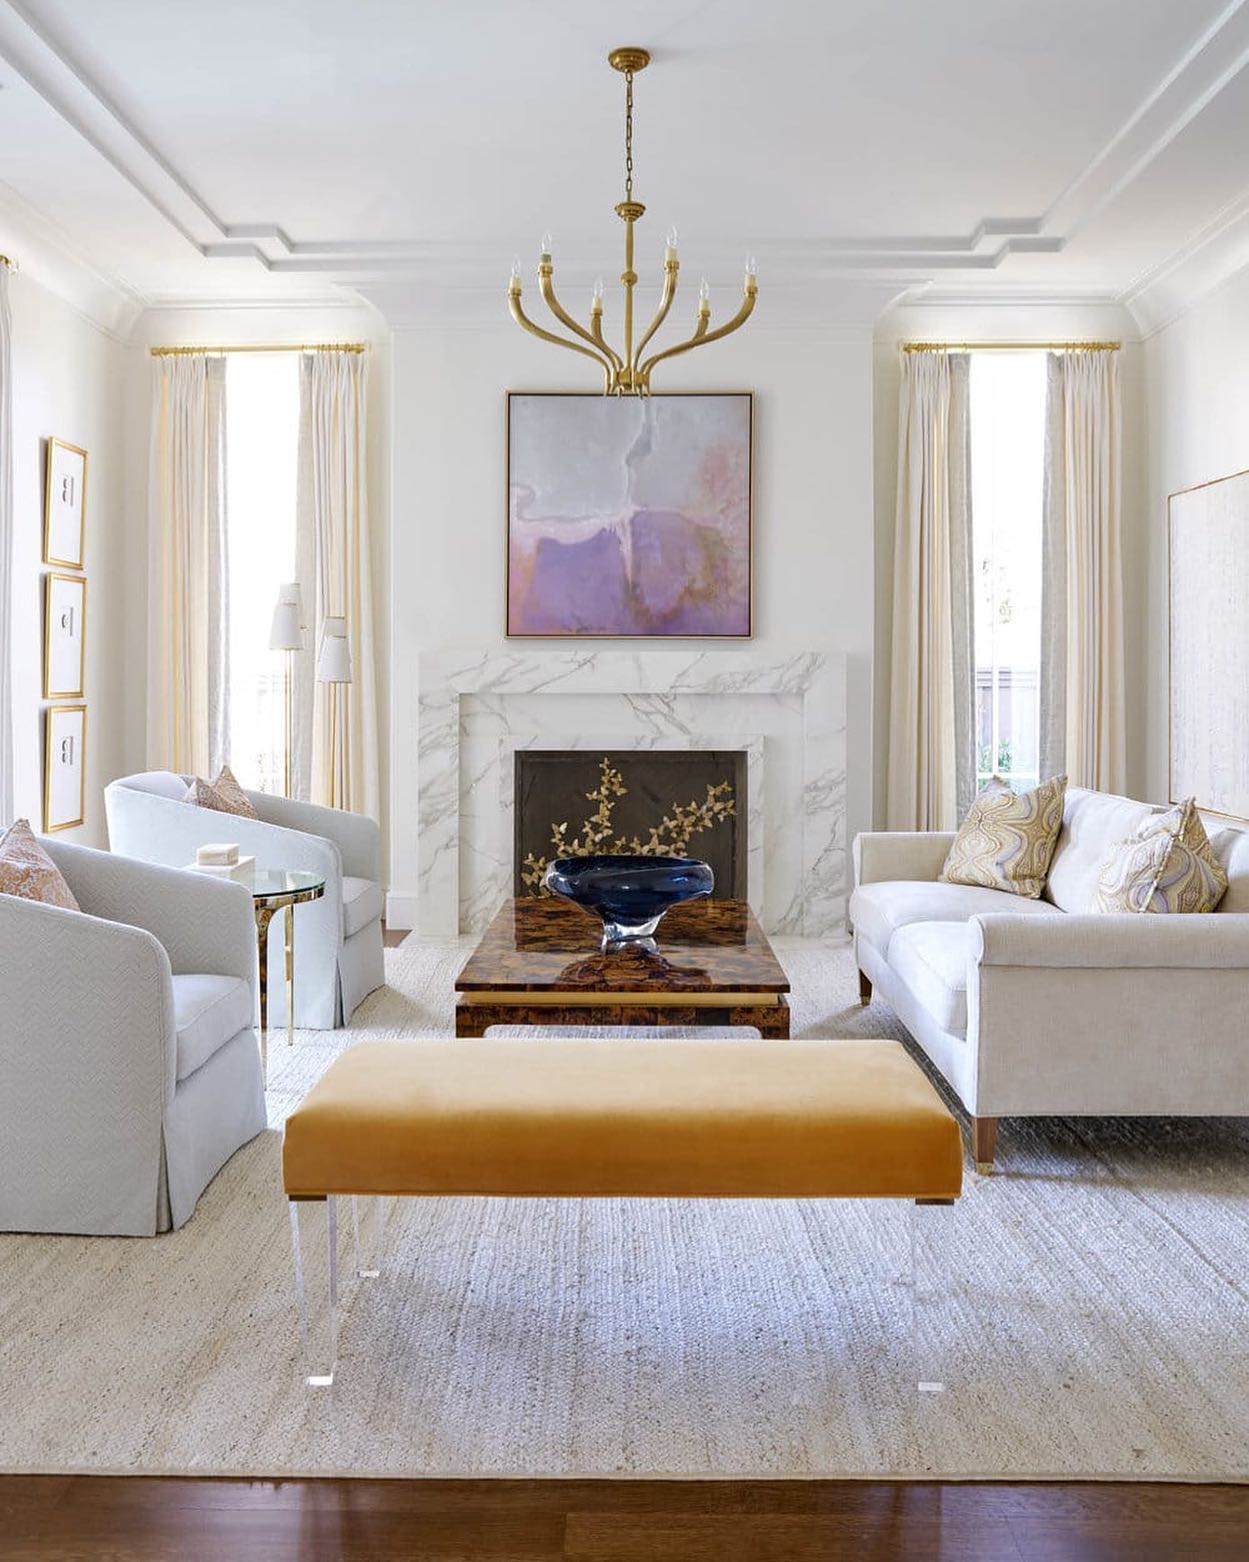 Tour a character-filled  home in Texas designed by the talented @jenkinsinteriors on Design Chic today, link in bio. 

Photography: @nathanschroderphoto 

#livingroom #livingroomdecor #livingroomdecor #chandelier #orange #orangebench #housebeautiful #designchic